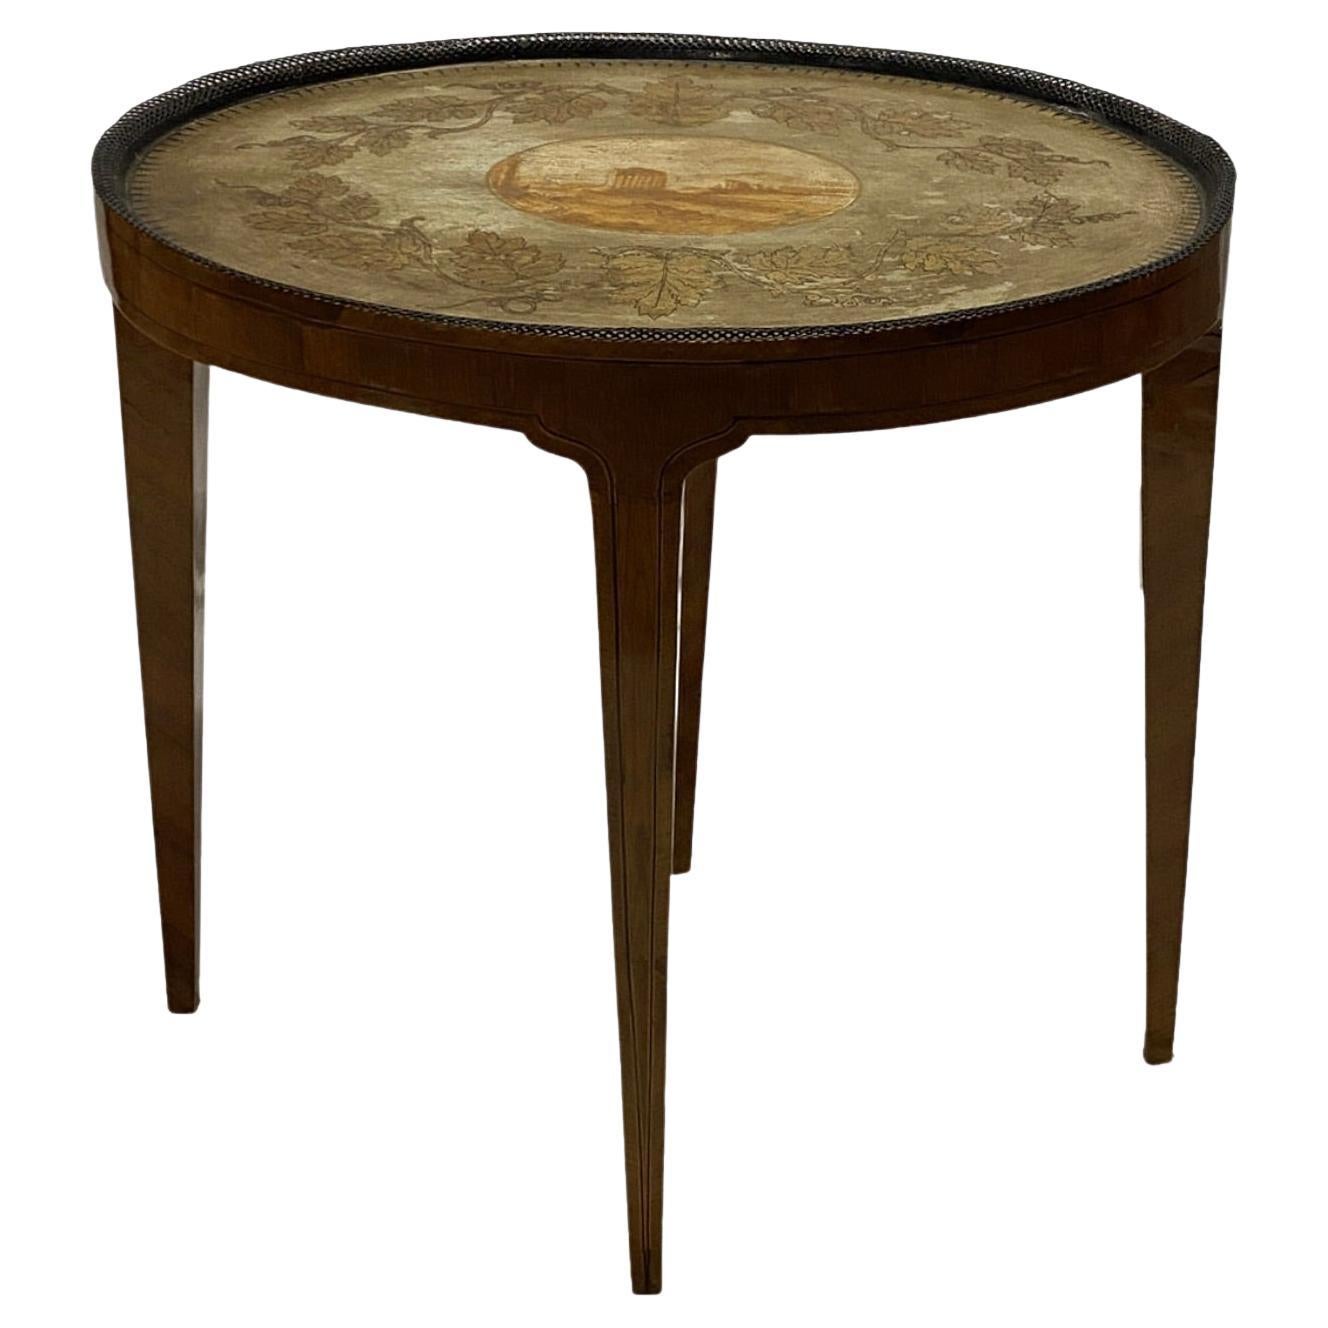 19th Century Dutch Oval Mahogany Entry Table with Charming Landscape Painted on  For Sale